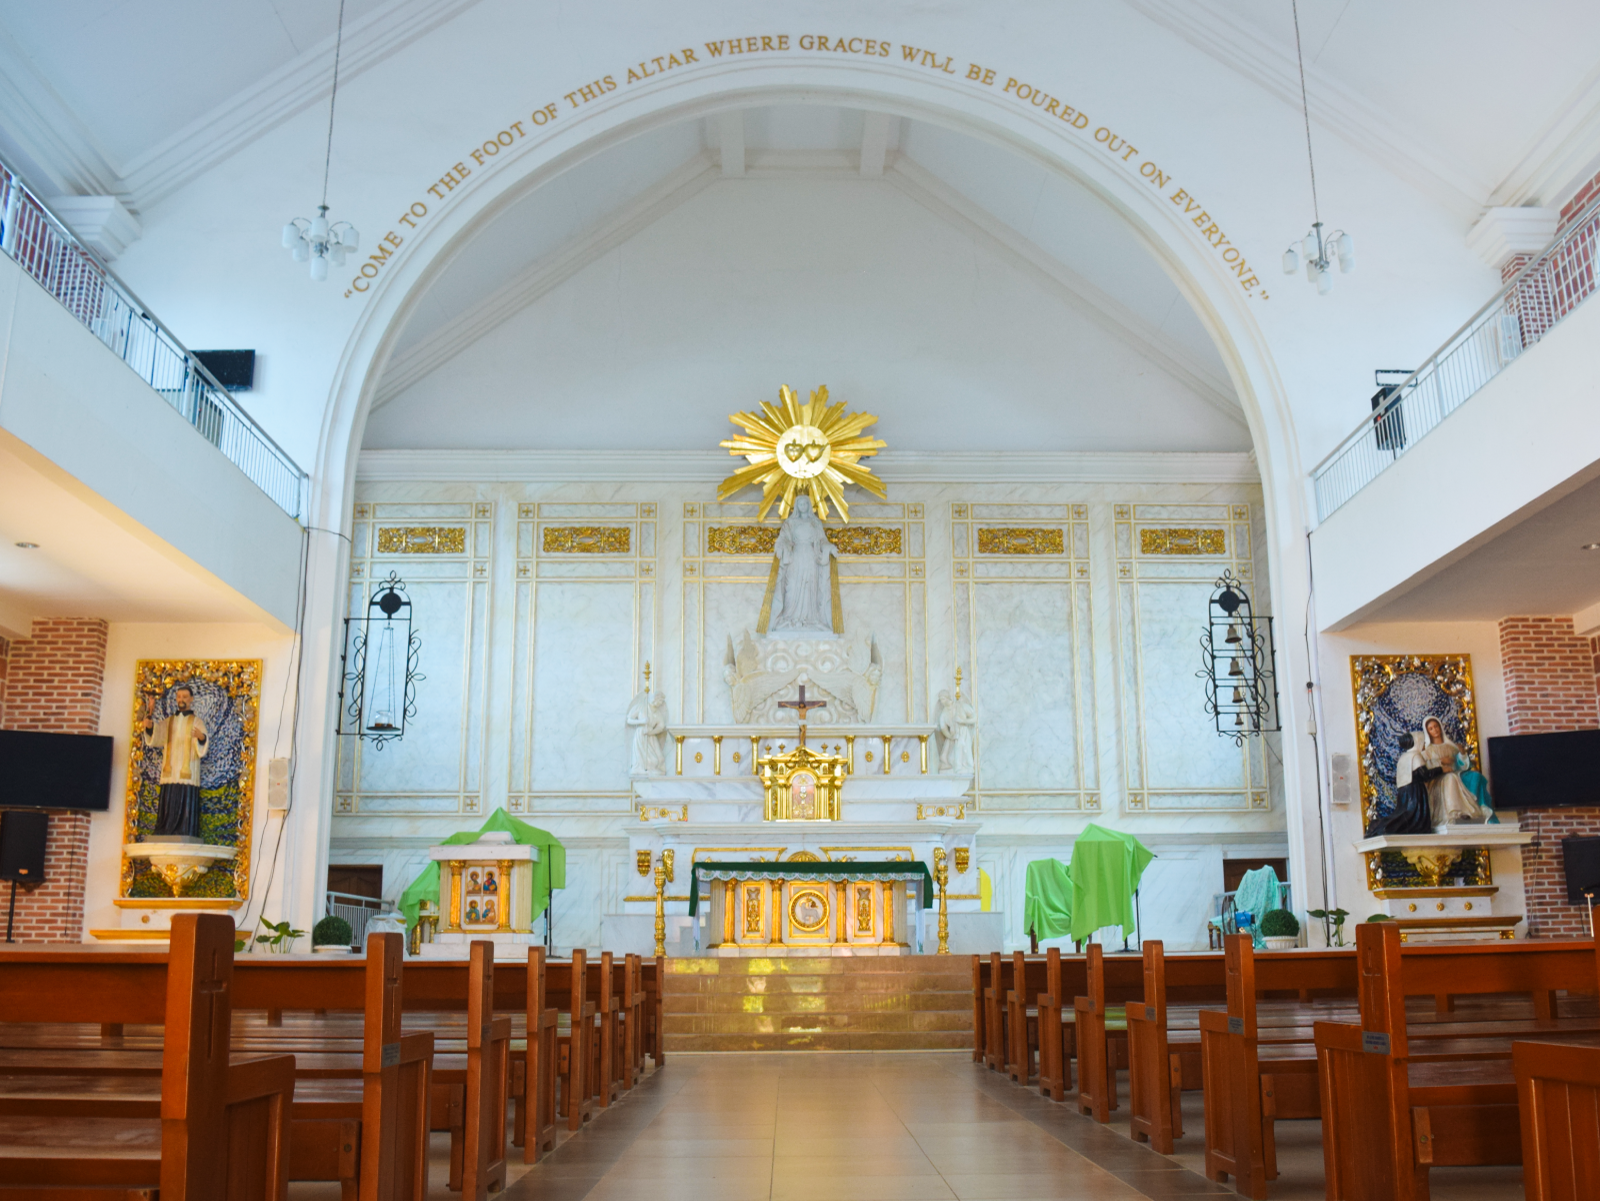 Our Lady of the Miraculous Medal Parish – Mangaldan, Pangasinan, Philippines